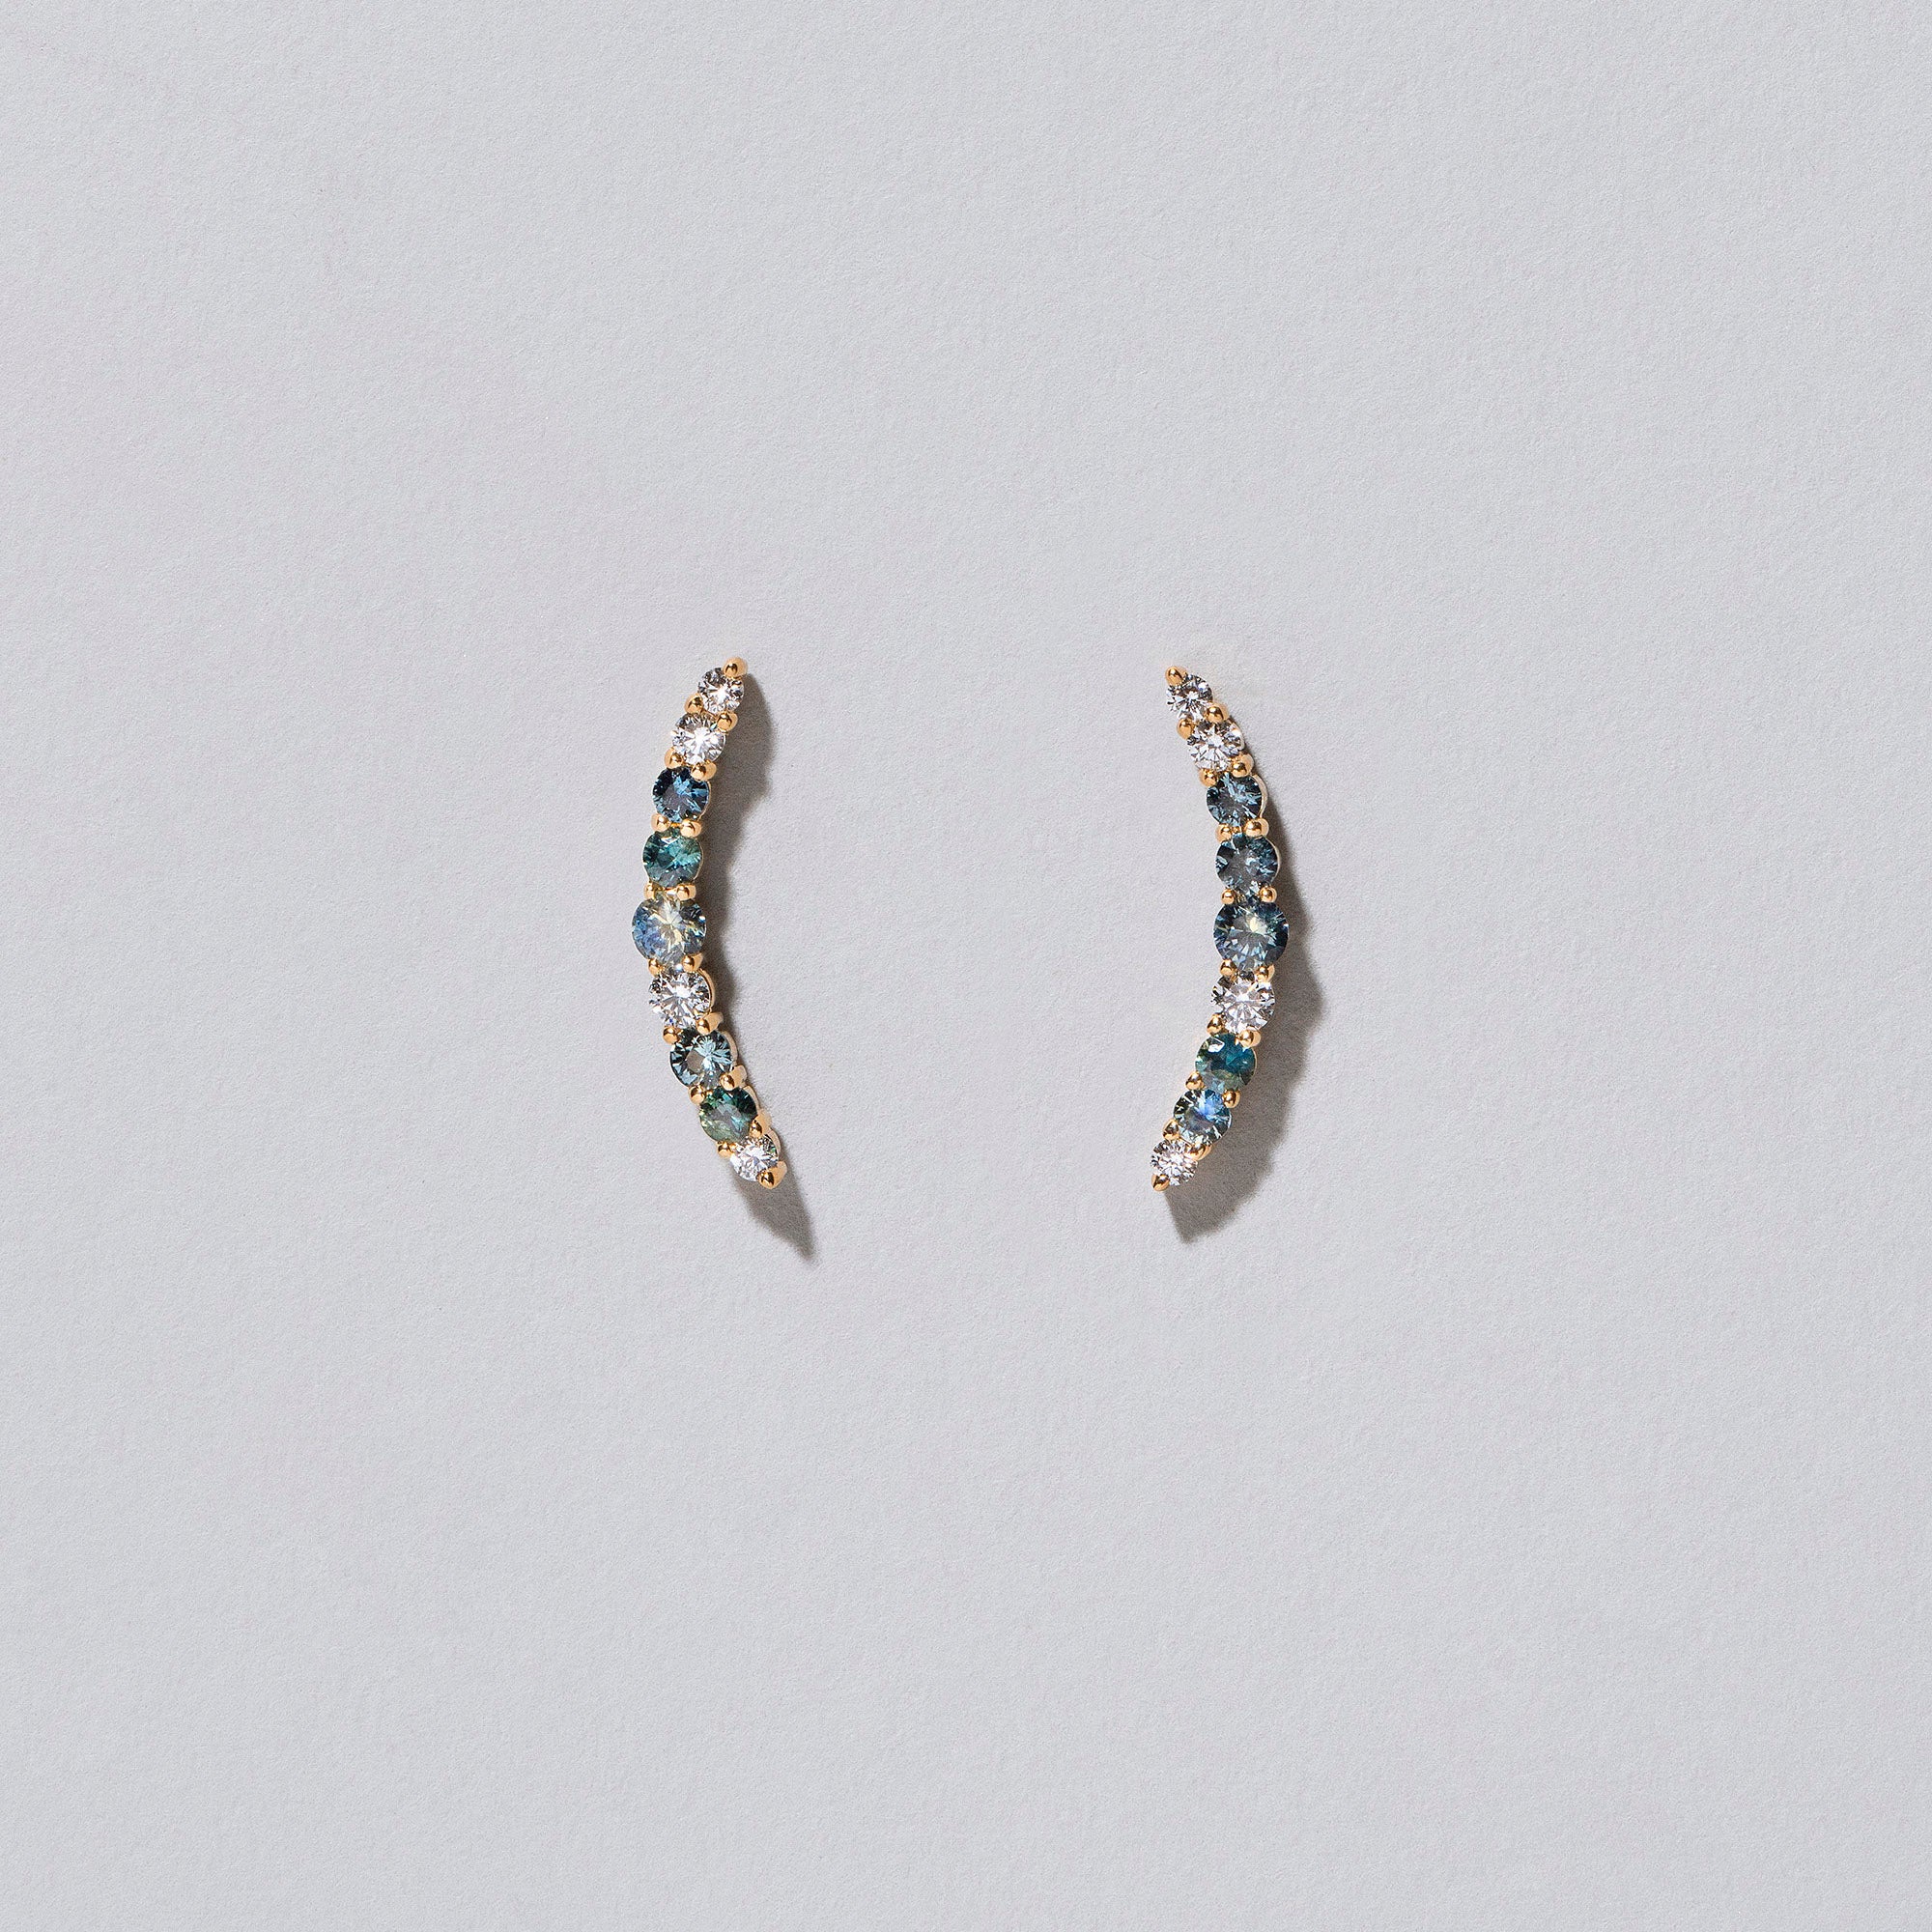 product_details::Crescent Ear Climber Stud Earrings - Sapphier and White Diamond on light colored background.